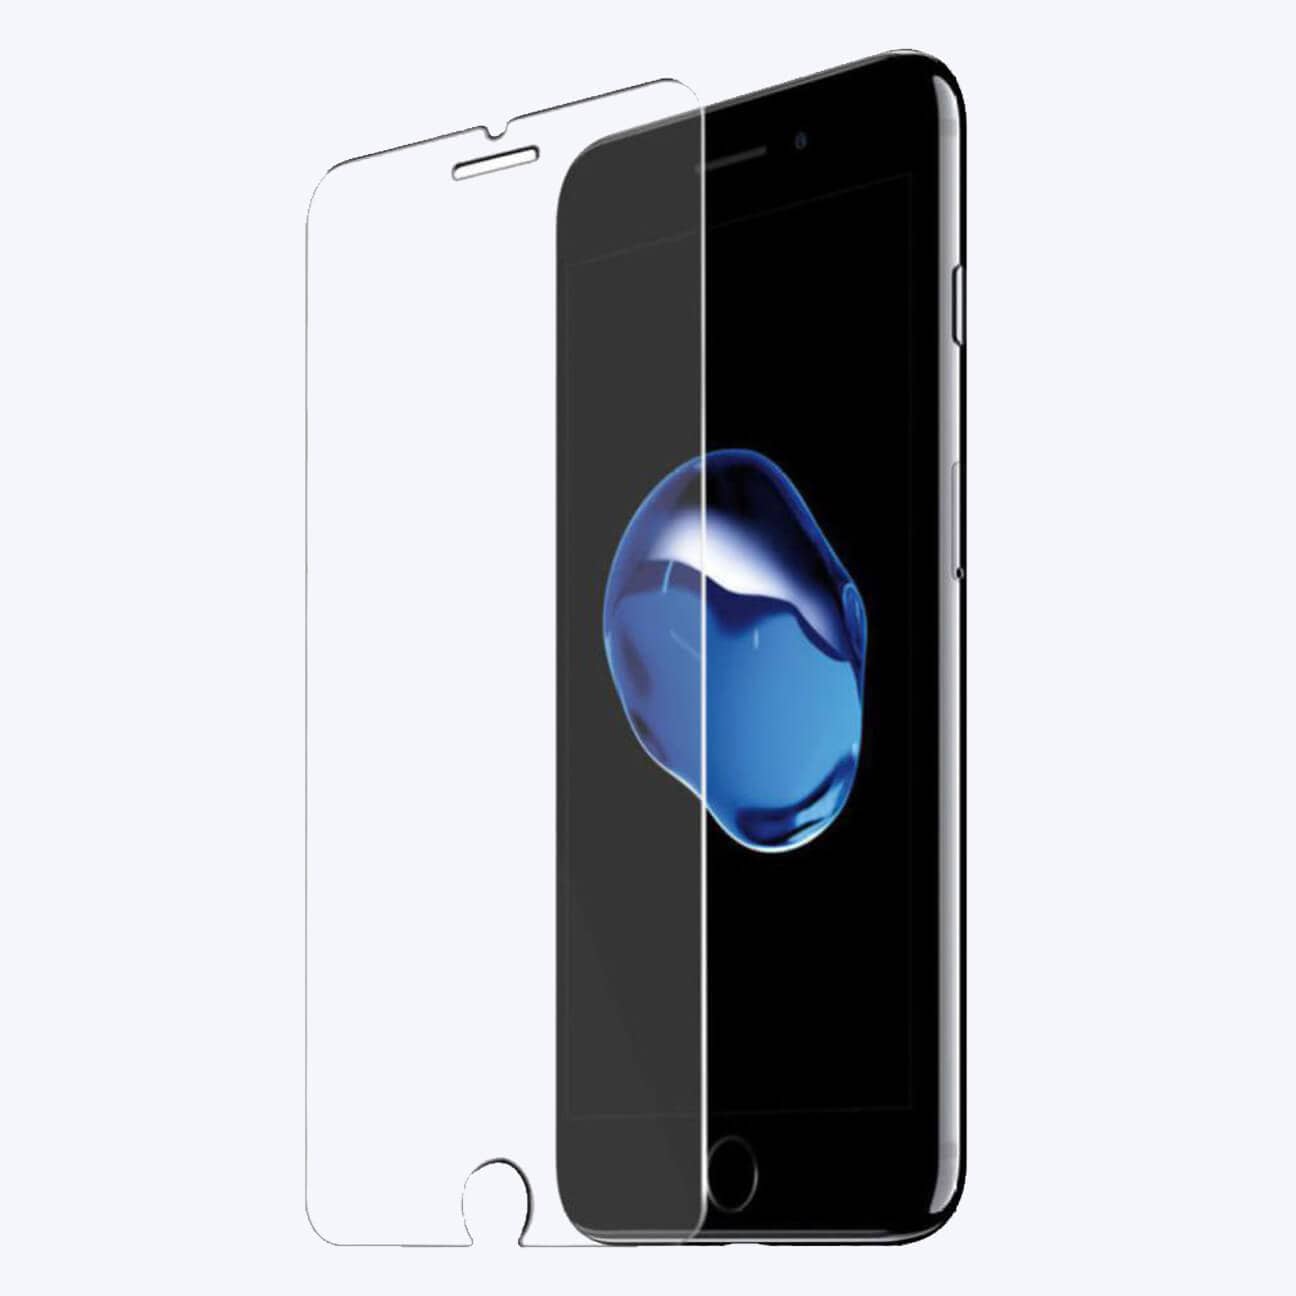 Samsung Galaxy J7 Pro Tempered Glass Screen Protector